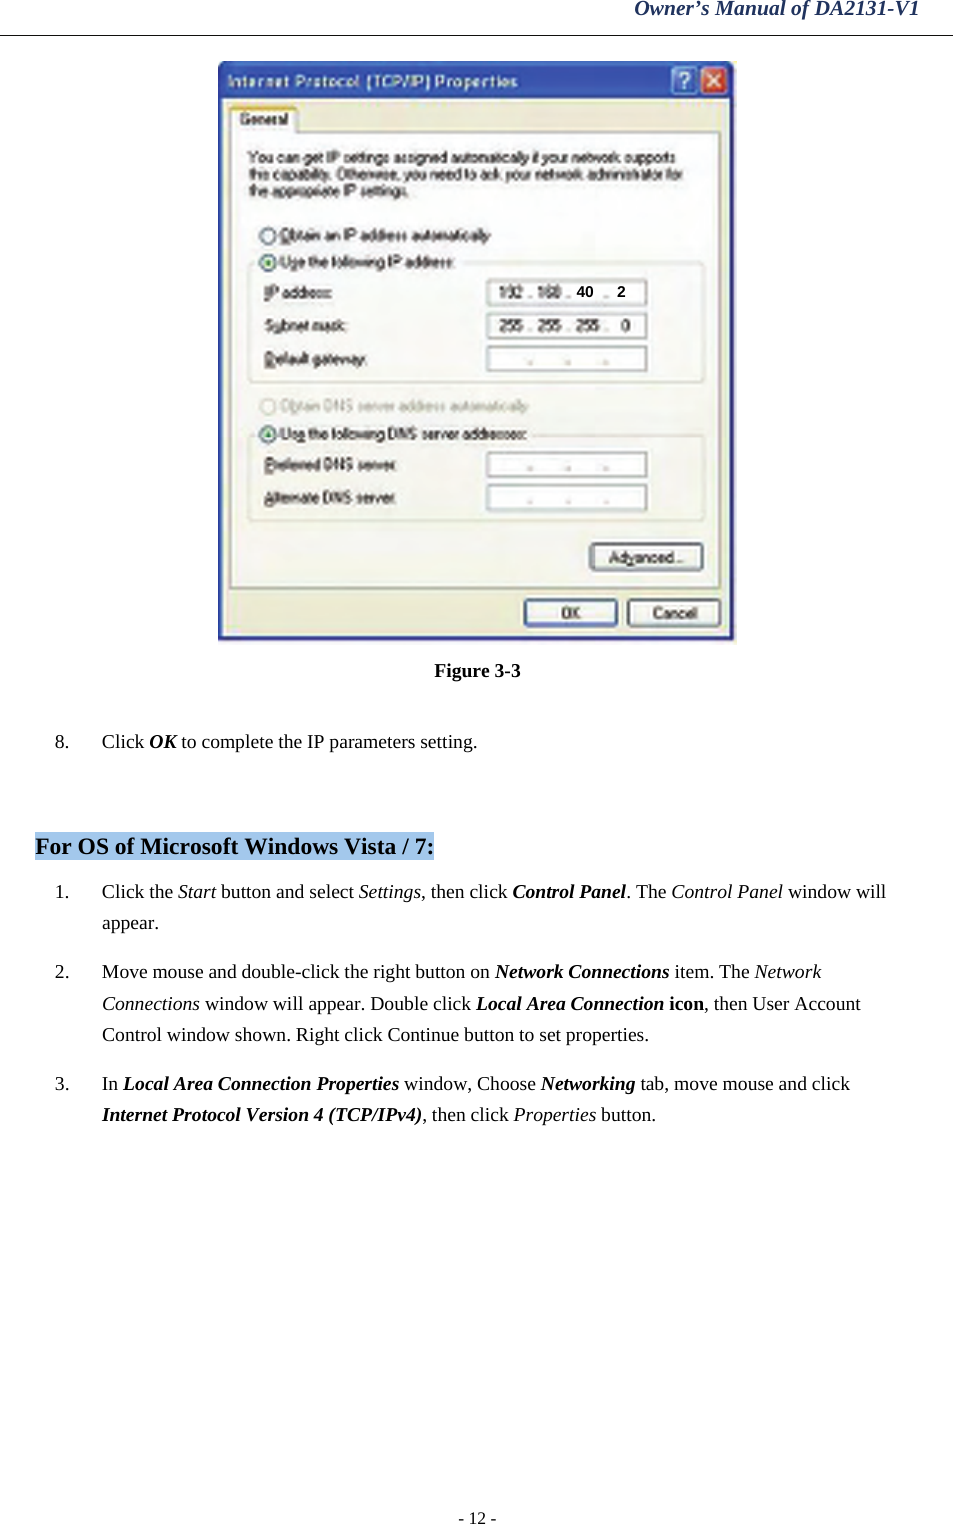 Owner’s Manual of DA2131-V1 - 12 -  Figure 3-3  8. Click OK to complete the IP parameters setting.  For OS of Microsoft Windows Vista / 7: 1. Click the Start button and select Settings, then click Control Panel. The Control Panel window will appear.  2. Move mouse and double-click the right button on Network Connections item. The Network Connections window will appear. Double click Local Area Connection icon, then User Account Control window shown. Right click Continue button to set properties.  3. In Local Area Connection Properties window, Choose Networking tab, move mouse and click Internet Protocol Version 4 (TCP/IPv4), then click Properties button.  40  2 